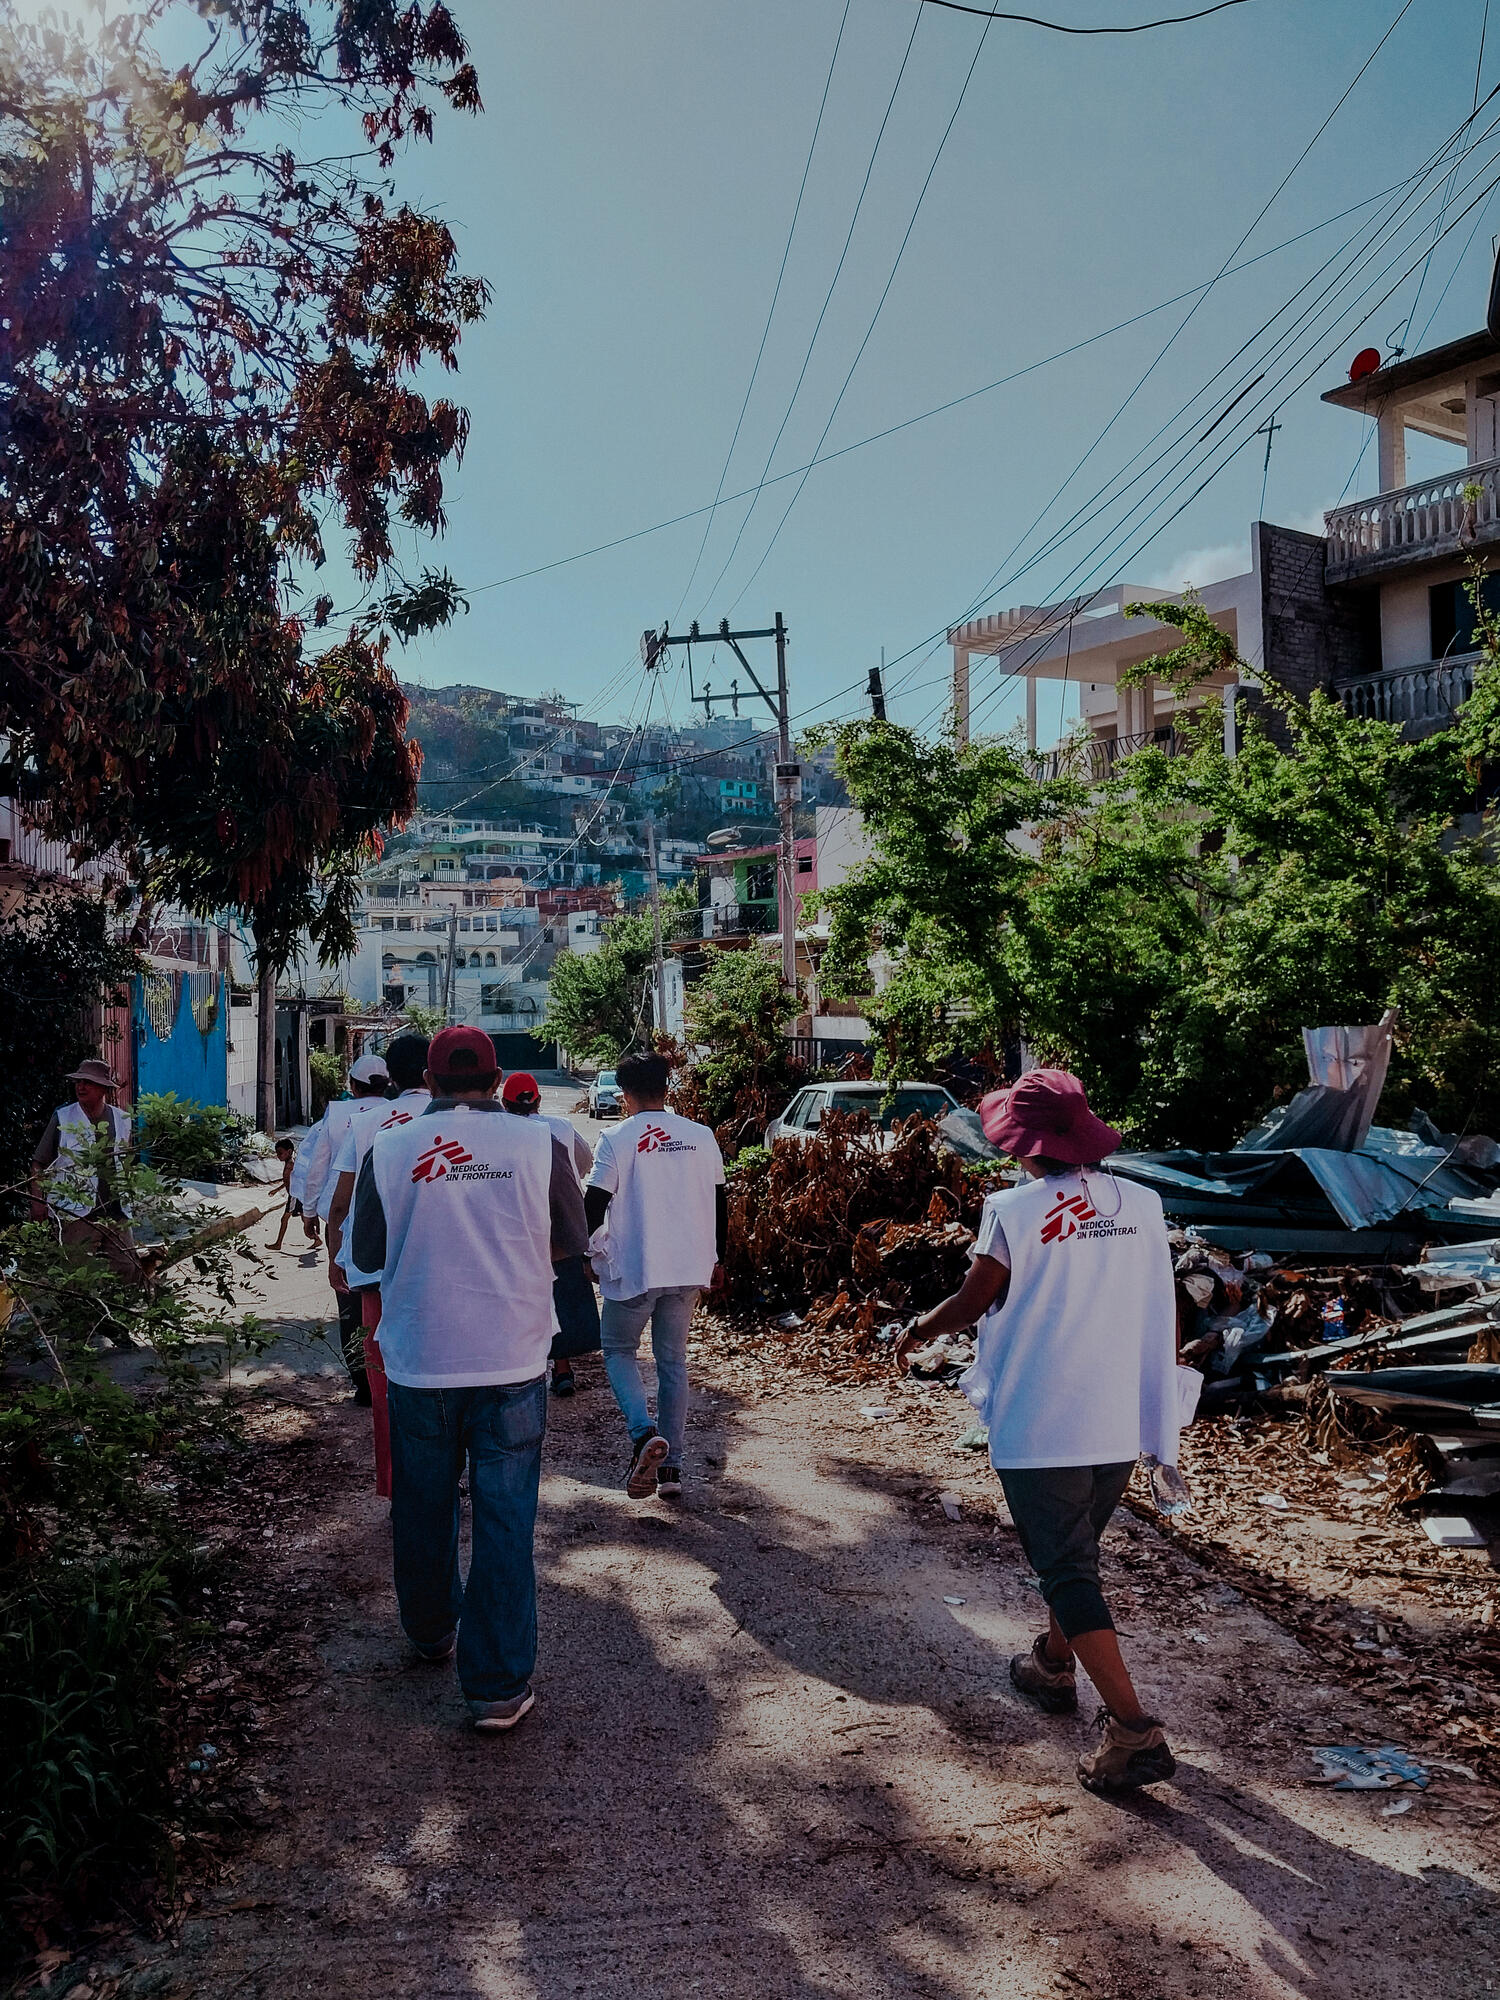 2.Médecins Sans Frontières (MSF) responds to the emergency following Hurricane Otis in Acapulco, Mexico